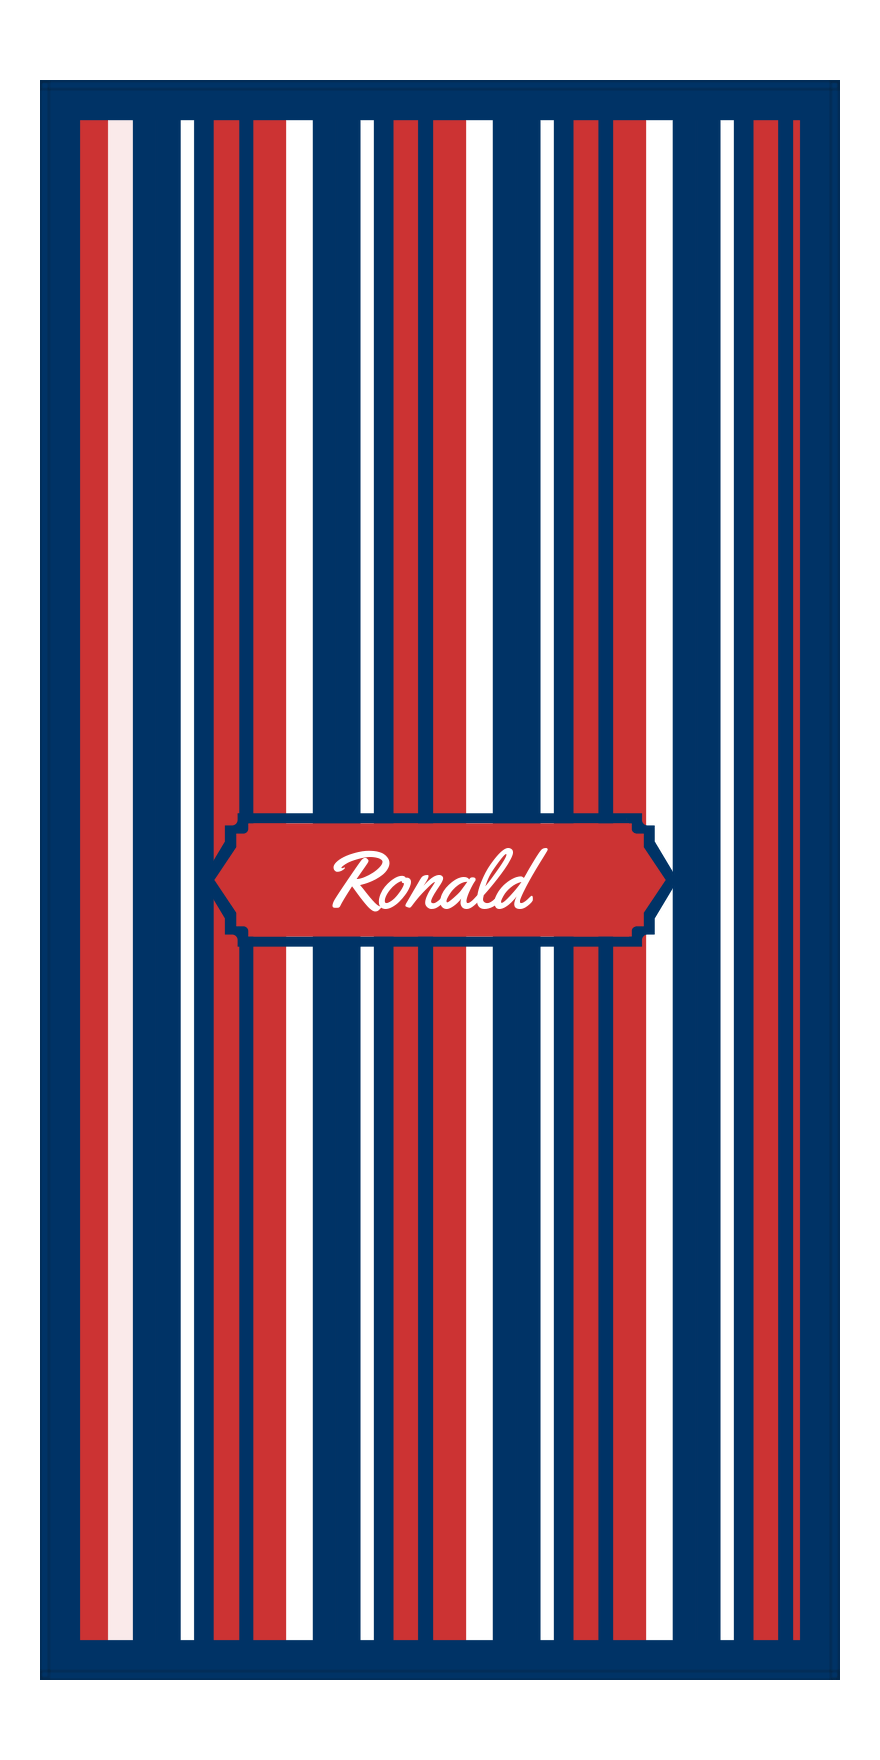 Personalized 5 Color Stripes 4 Repeat Beach Towel - Vertical - Red White and Blue - Oblong Frame - Front View